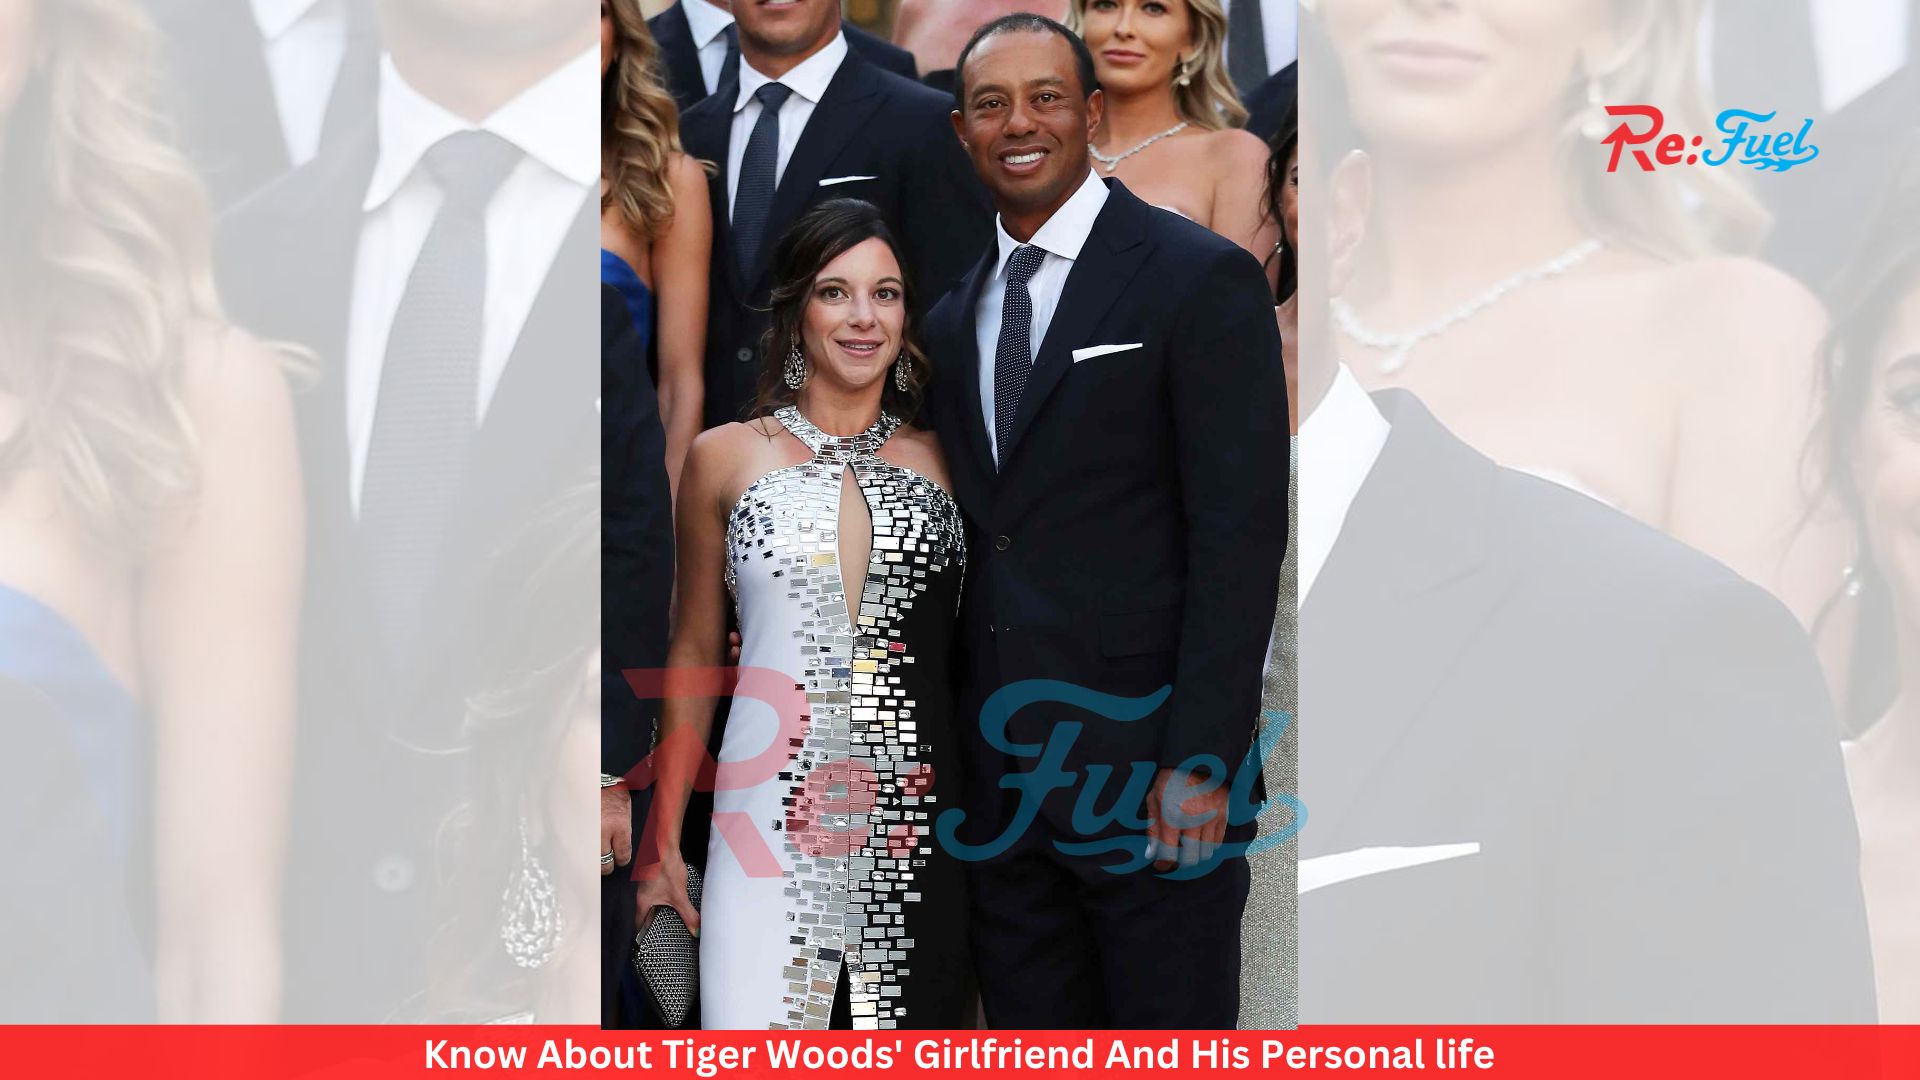 Know About Tiger Woods' Girlfriend And His Personal life